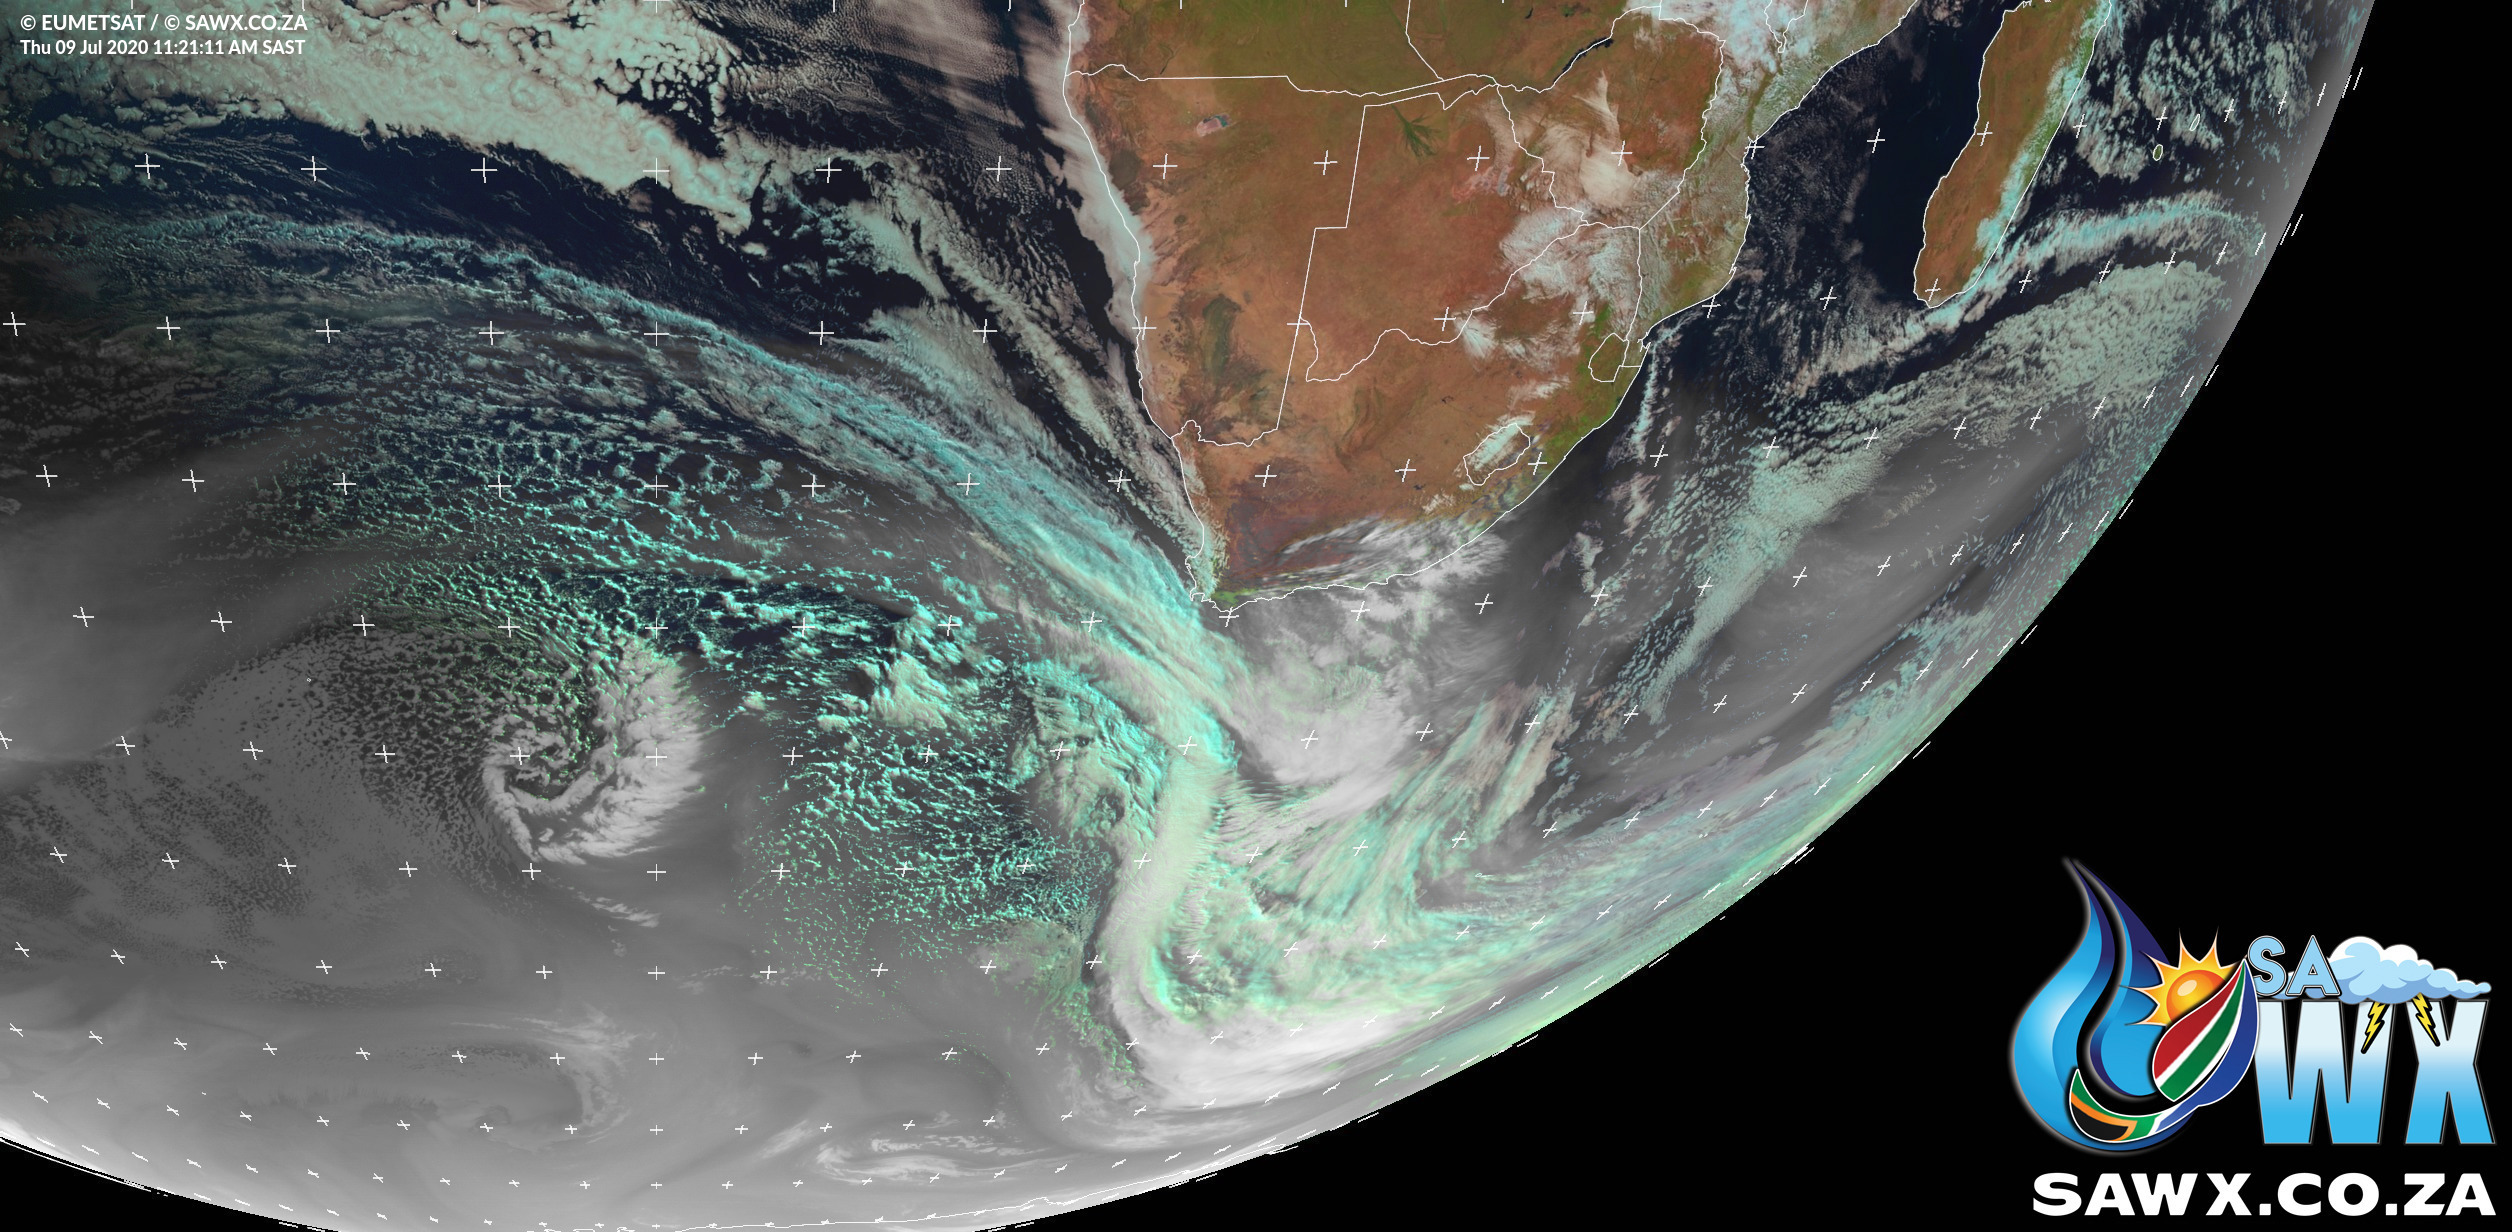 Stunning Satellite Images and Video of the Cold Fronts Impacting South Africa